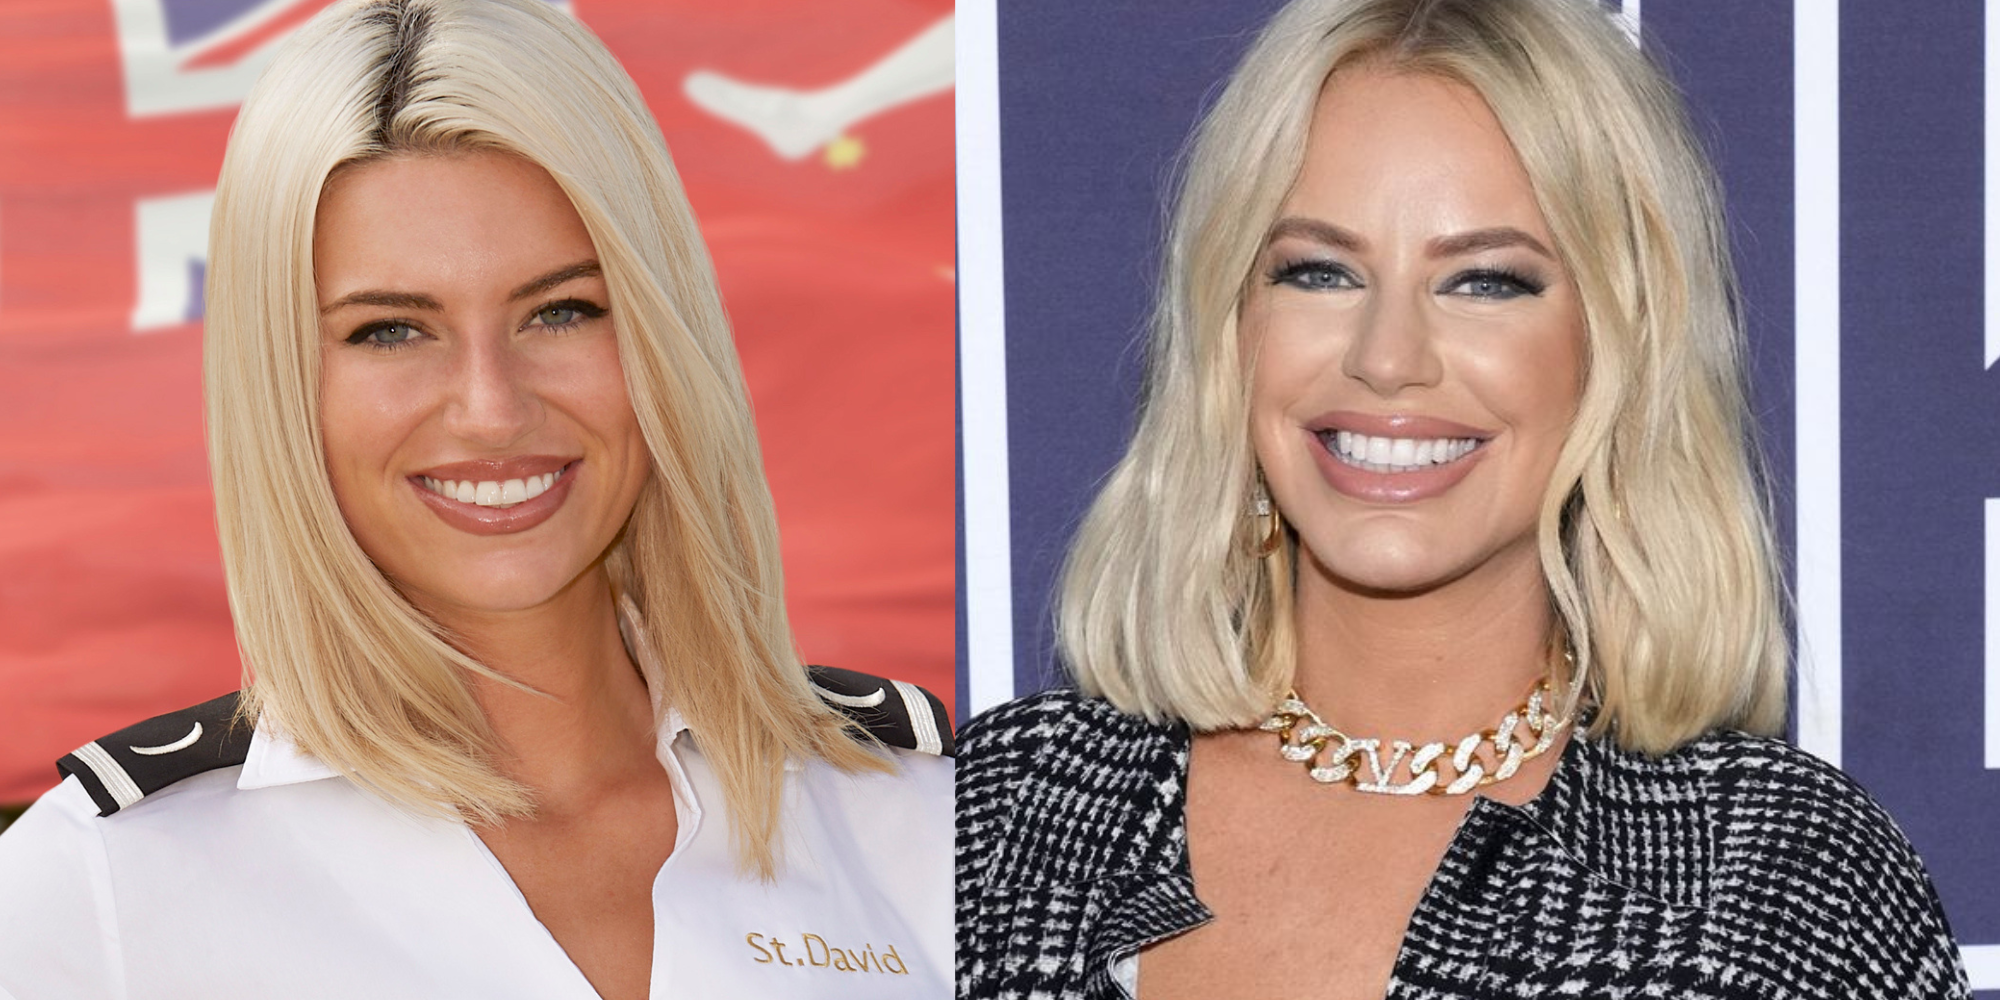 camille-lamb-caroline-stanbury side by side image